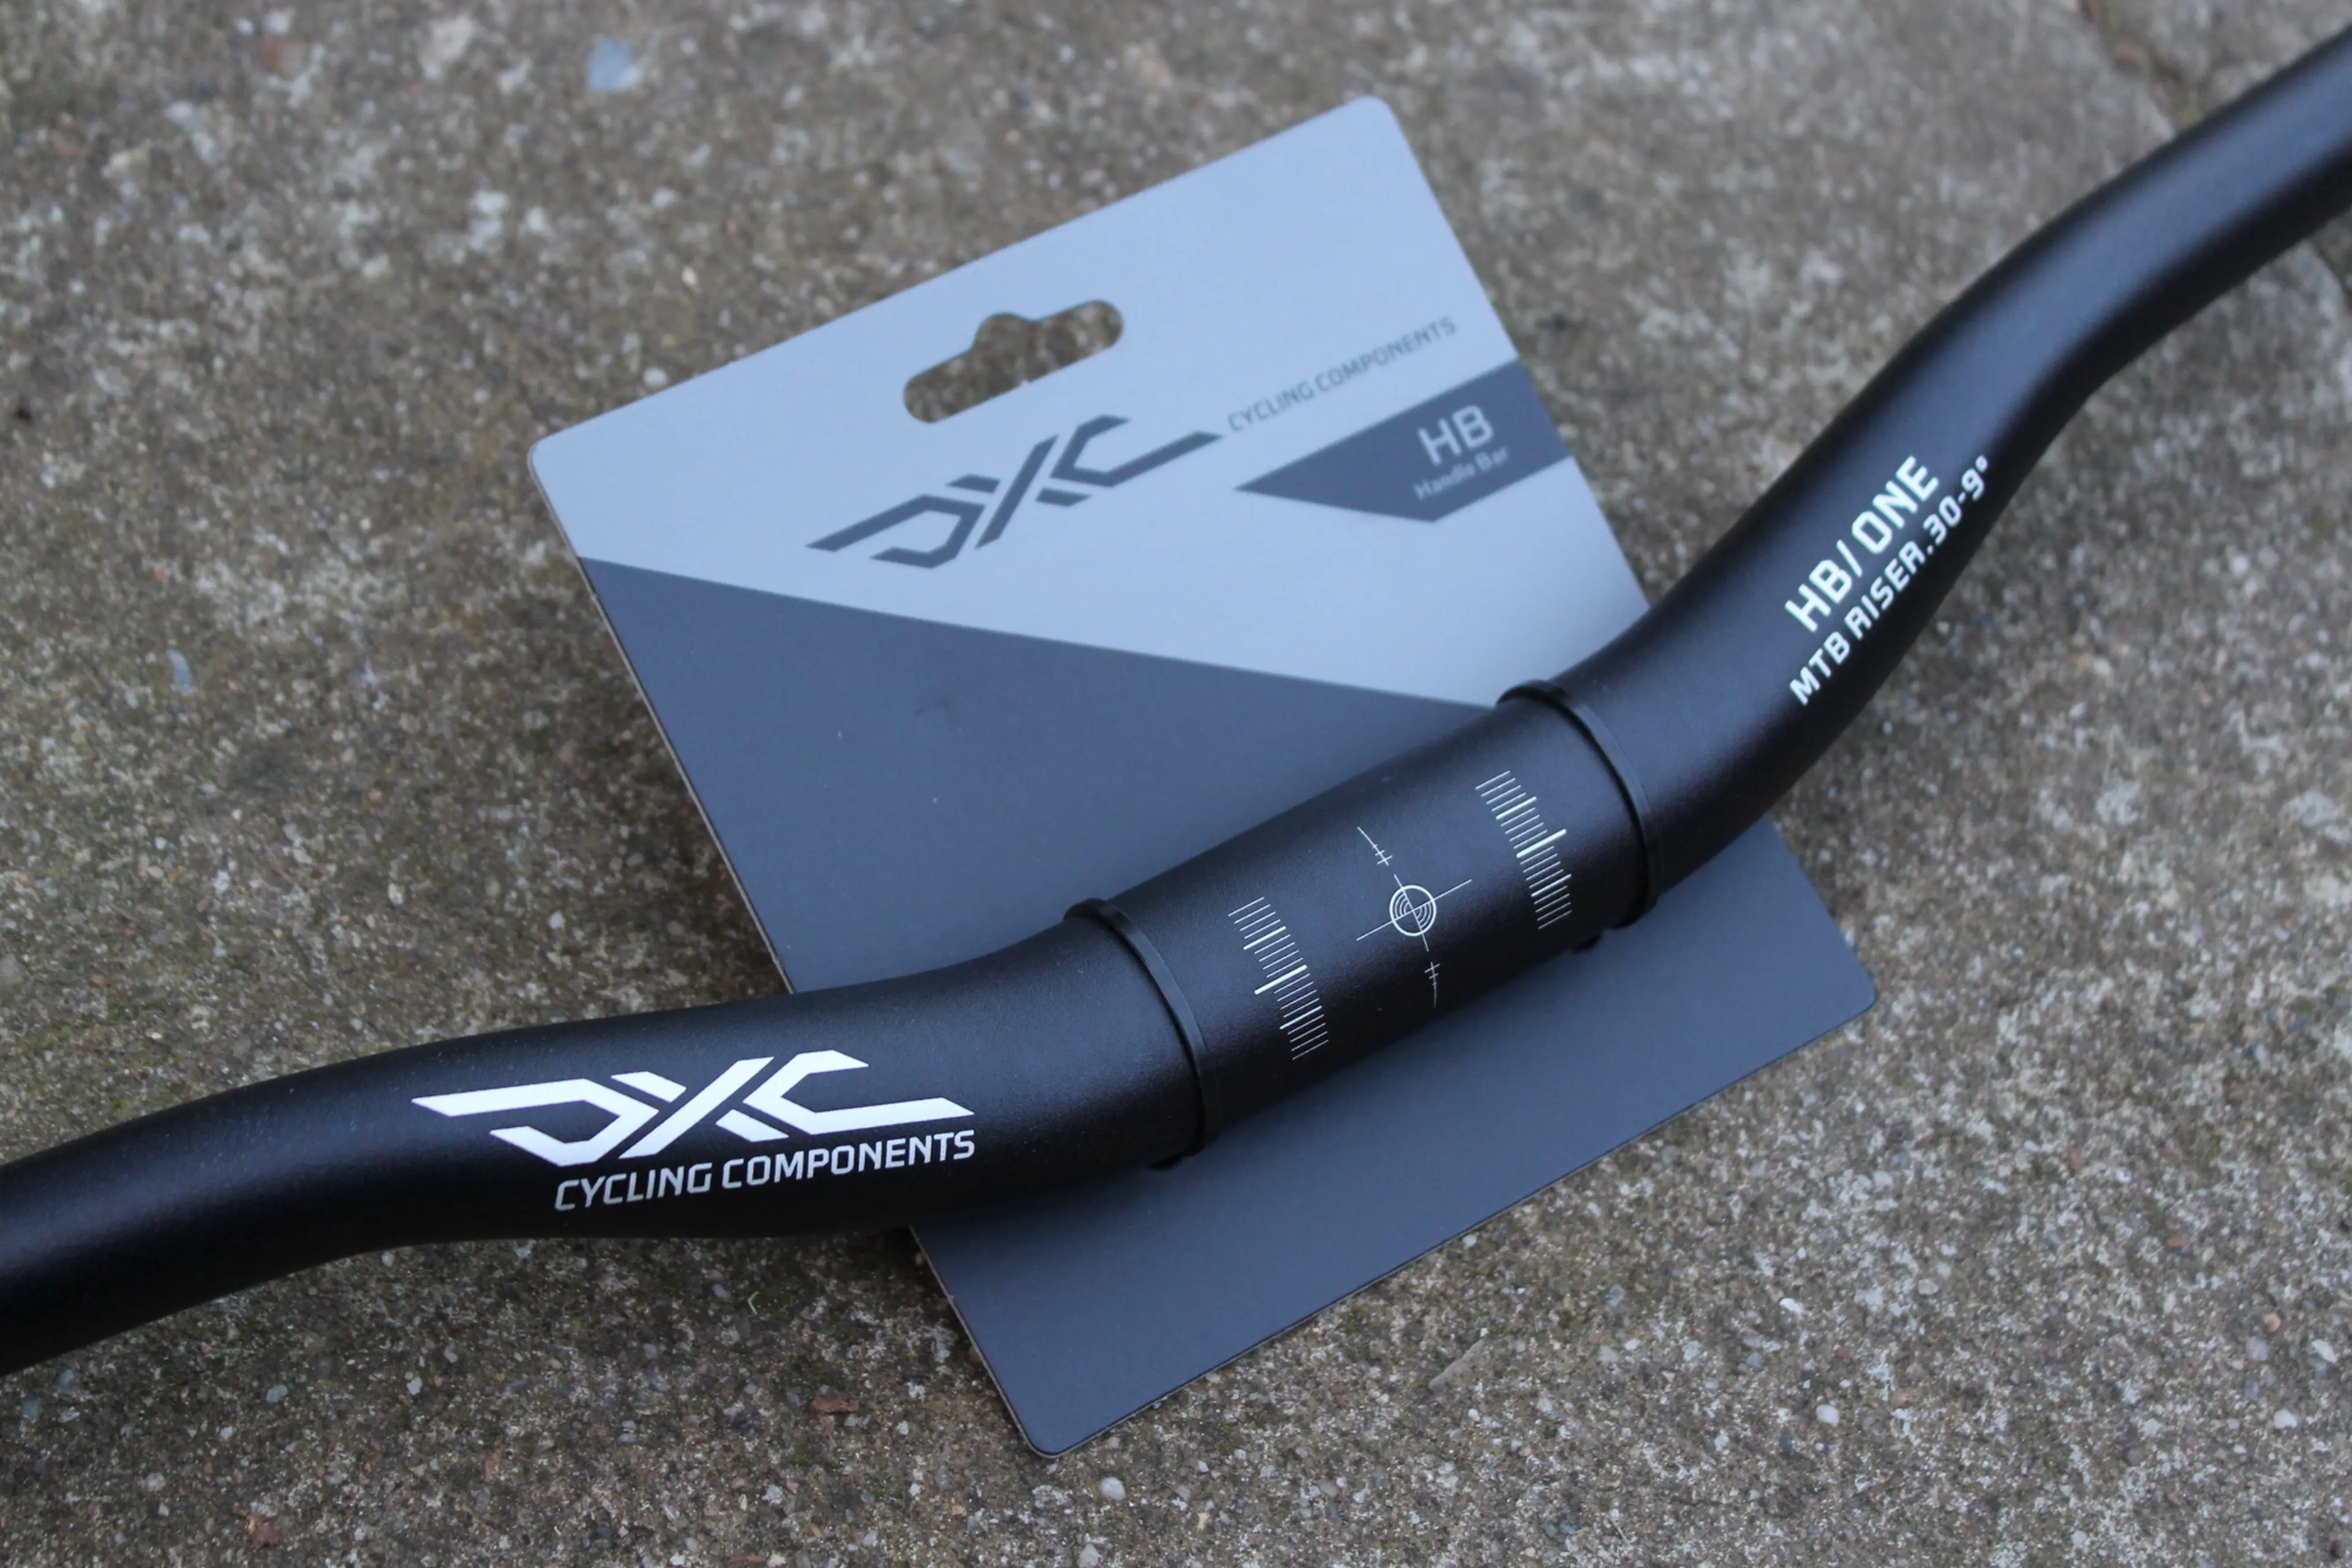 2. DXC Downhill ghidon 780mm lung 31.8 - rise 30